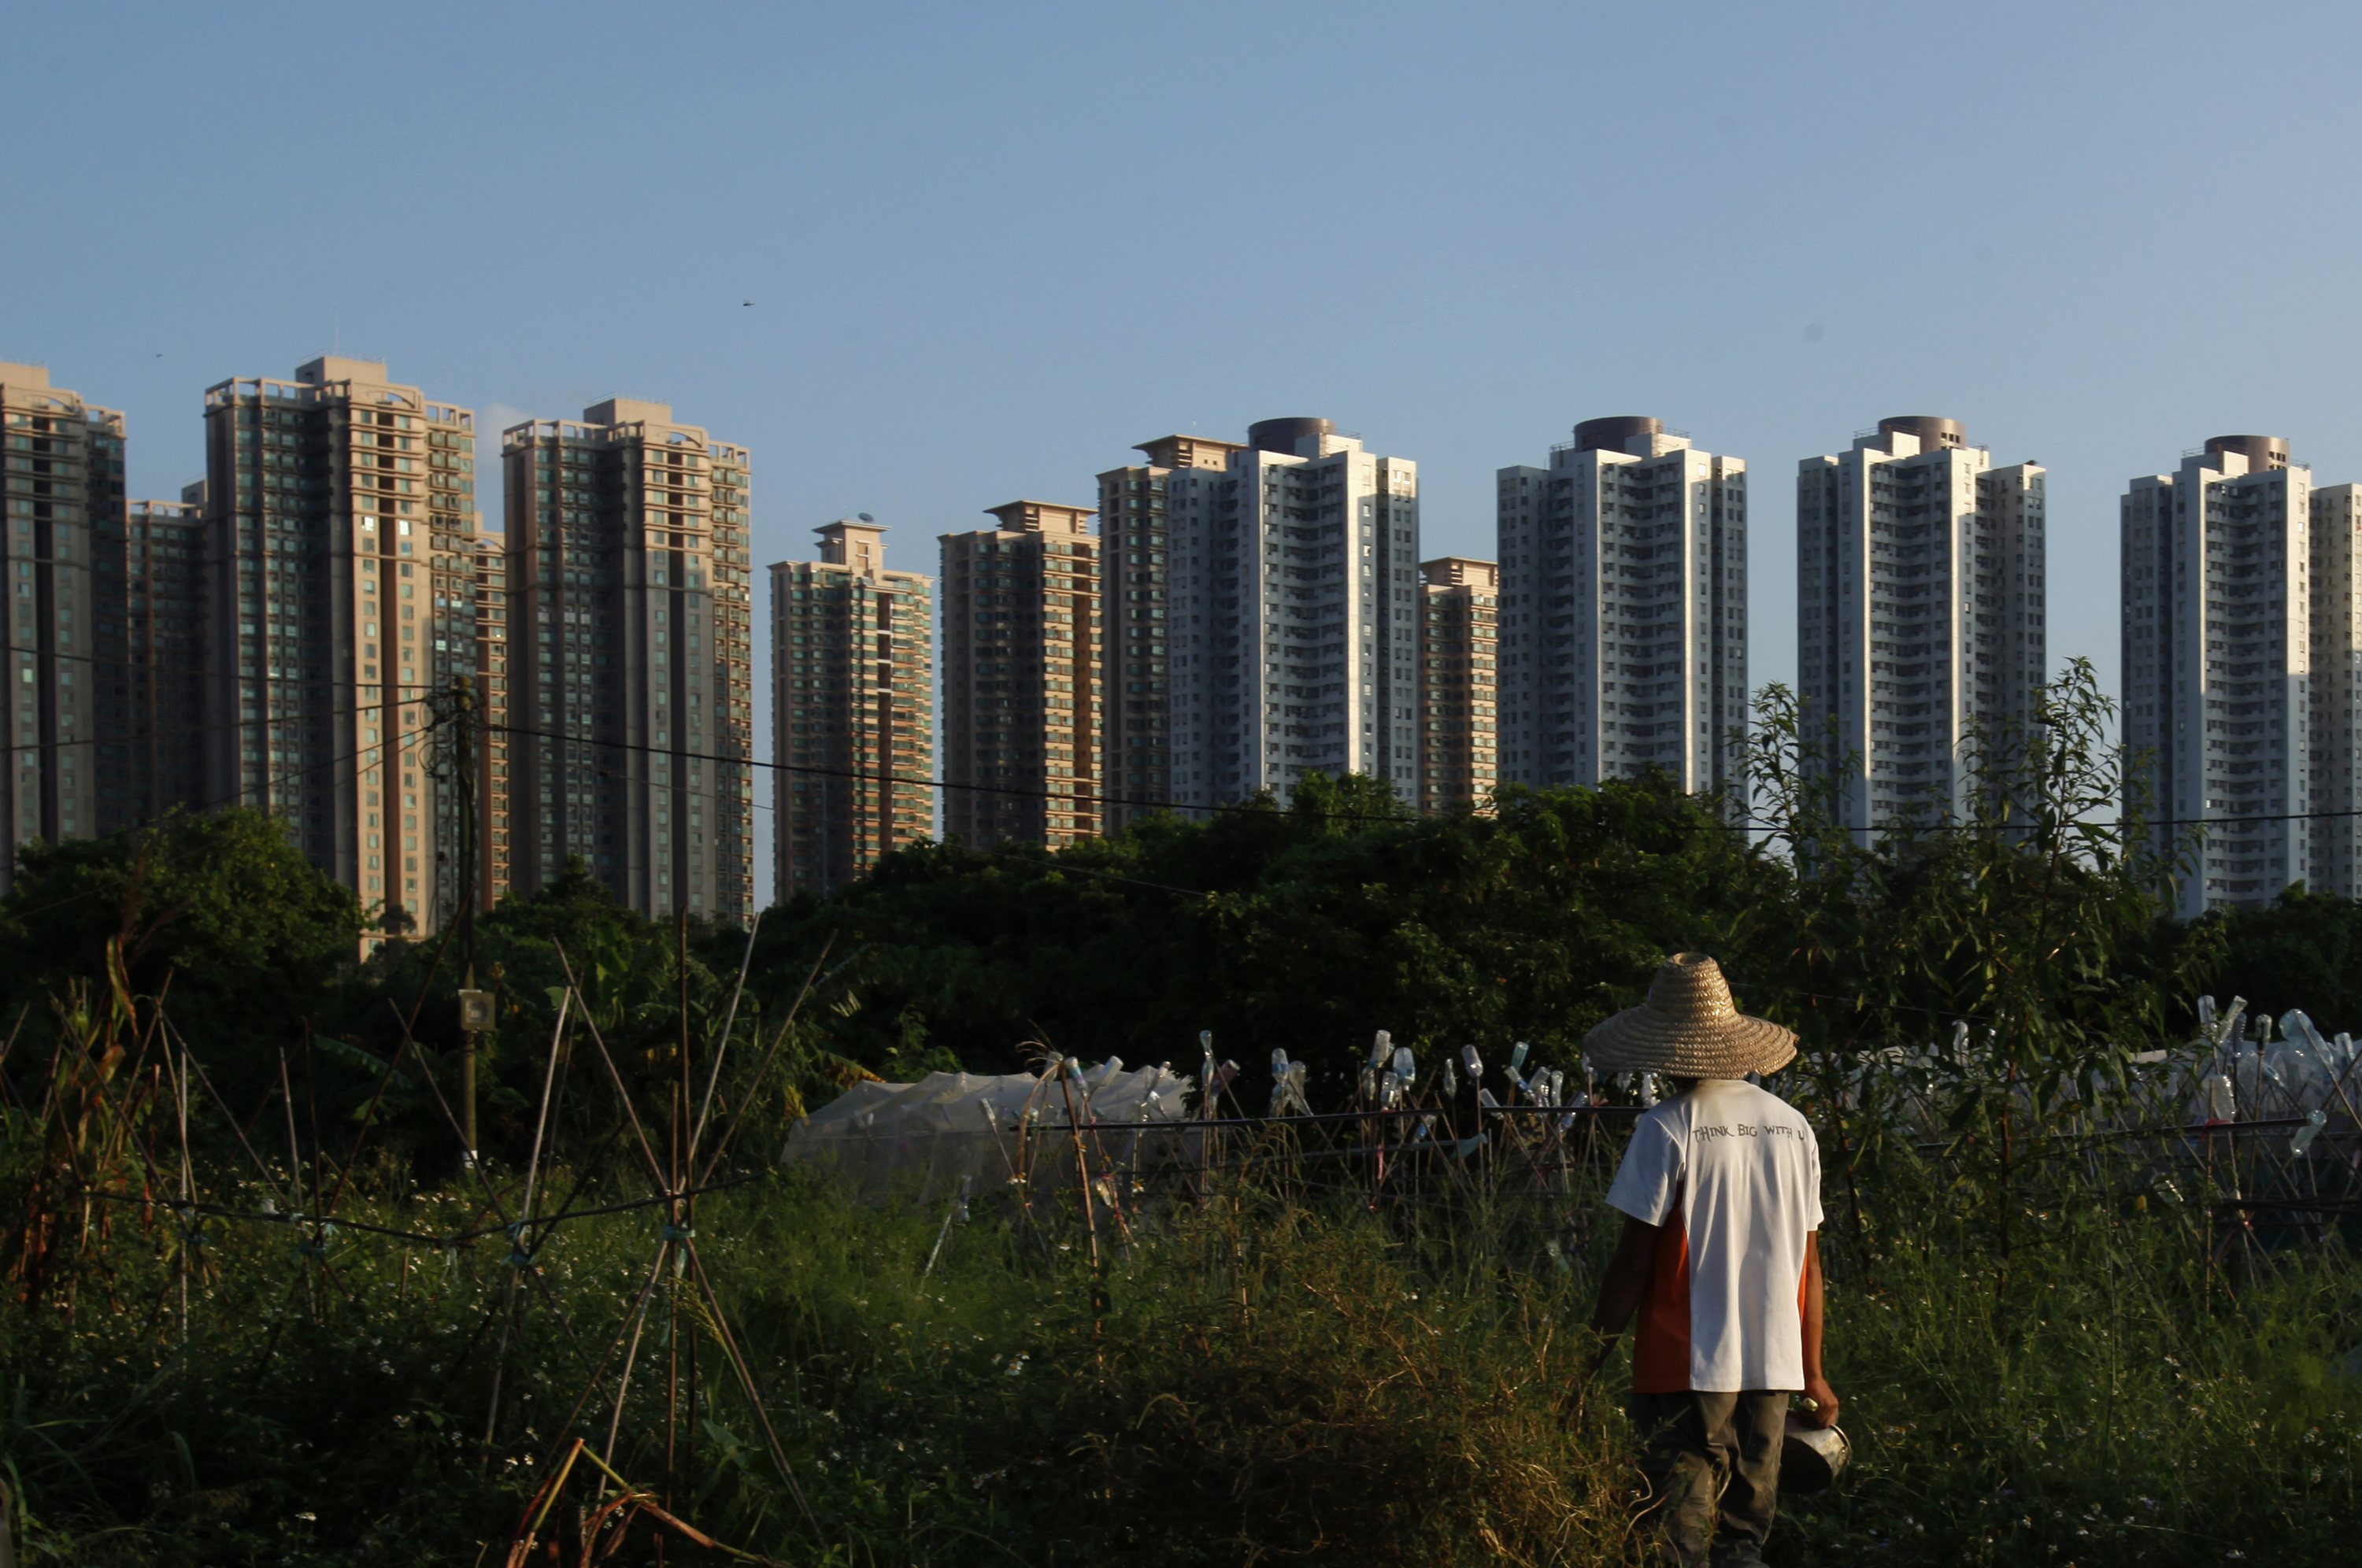 May plots of land among the high-rises be found in the various districts for local enthusiasts to cultivate? Photo: Reuters